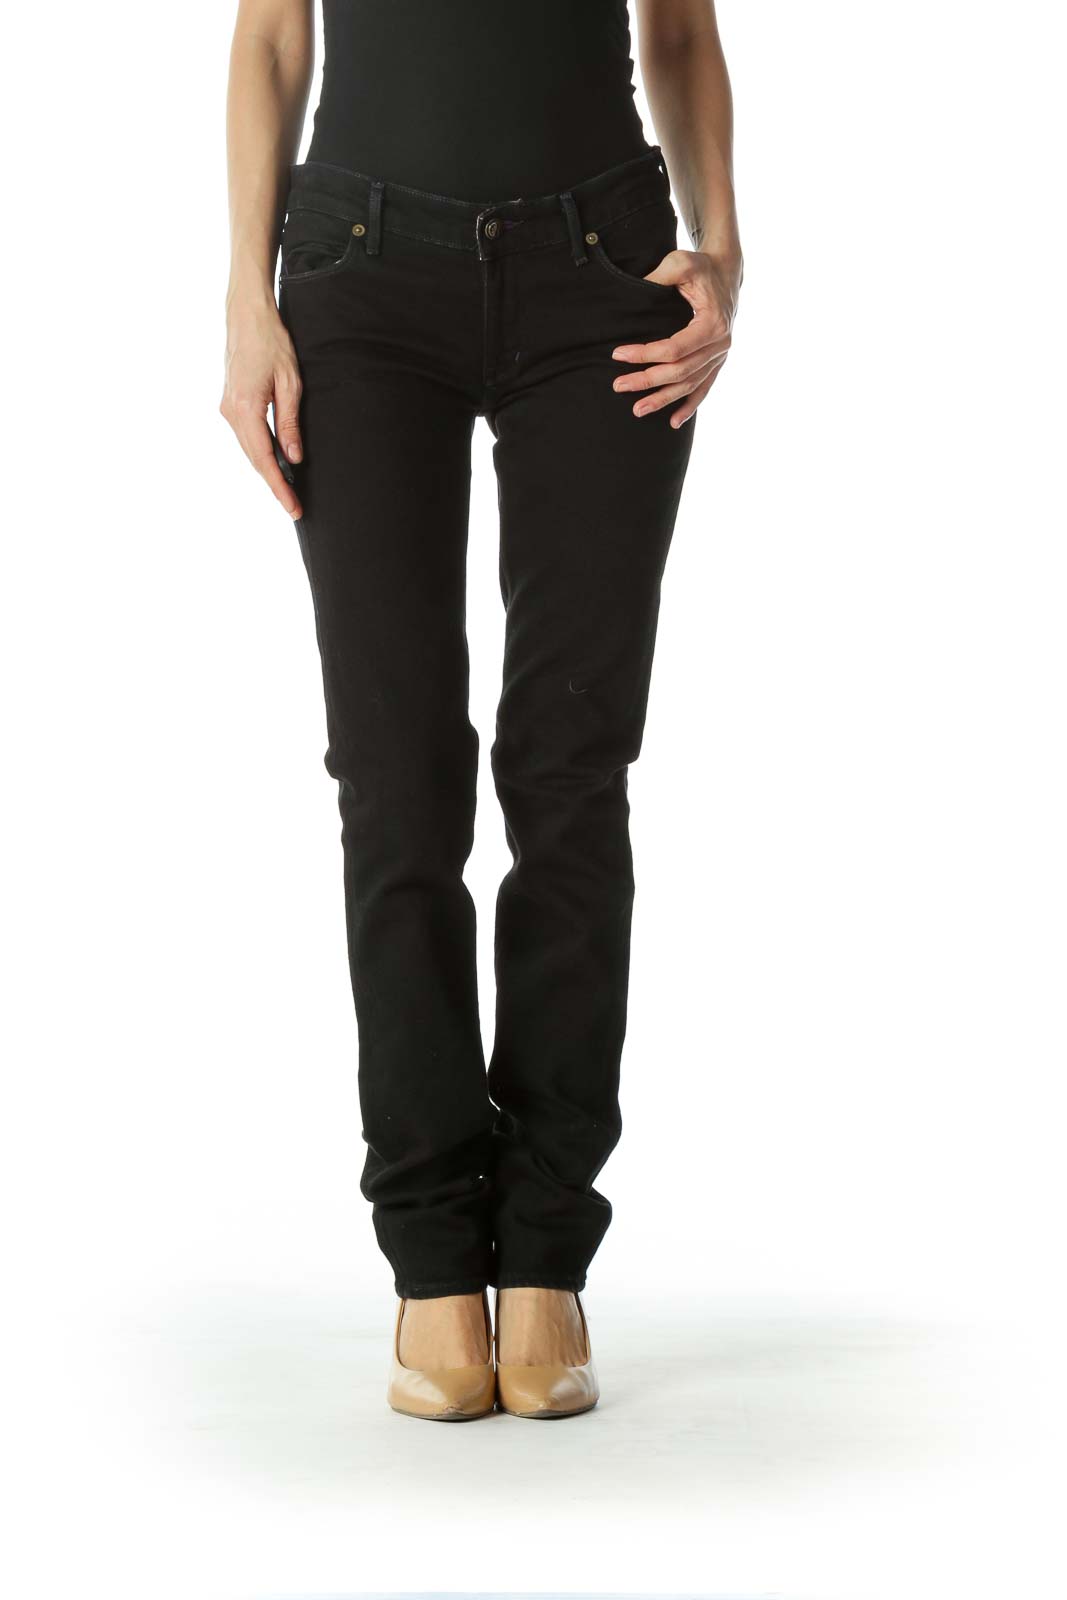 Black Embroidered Skinny Pants Front